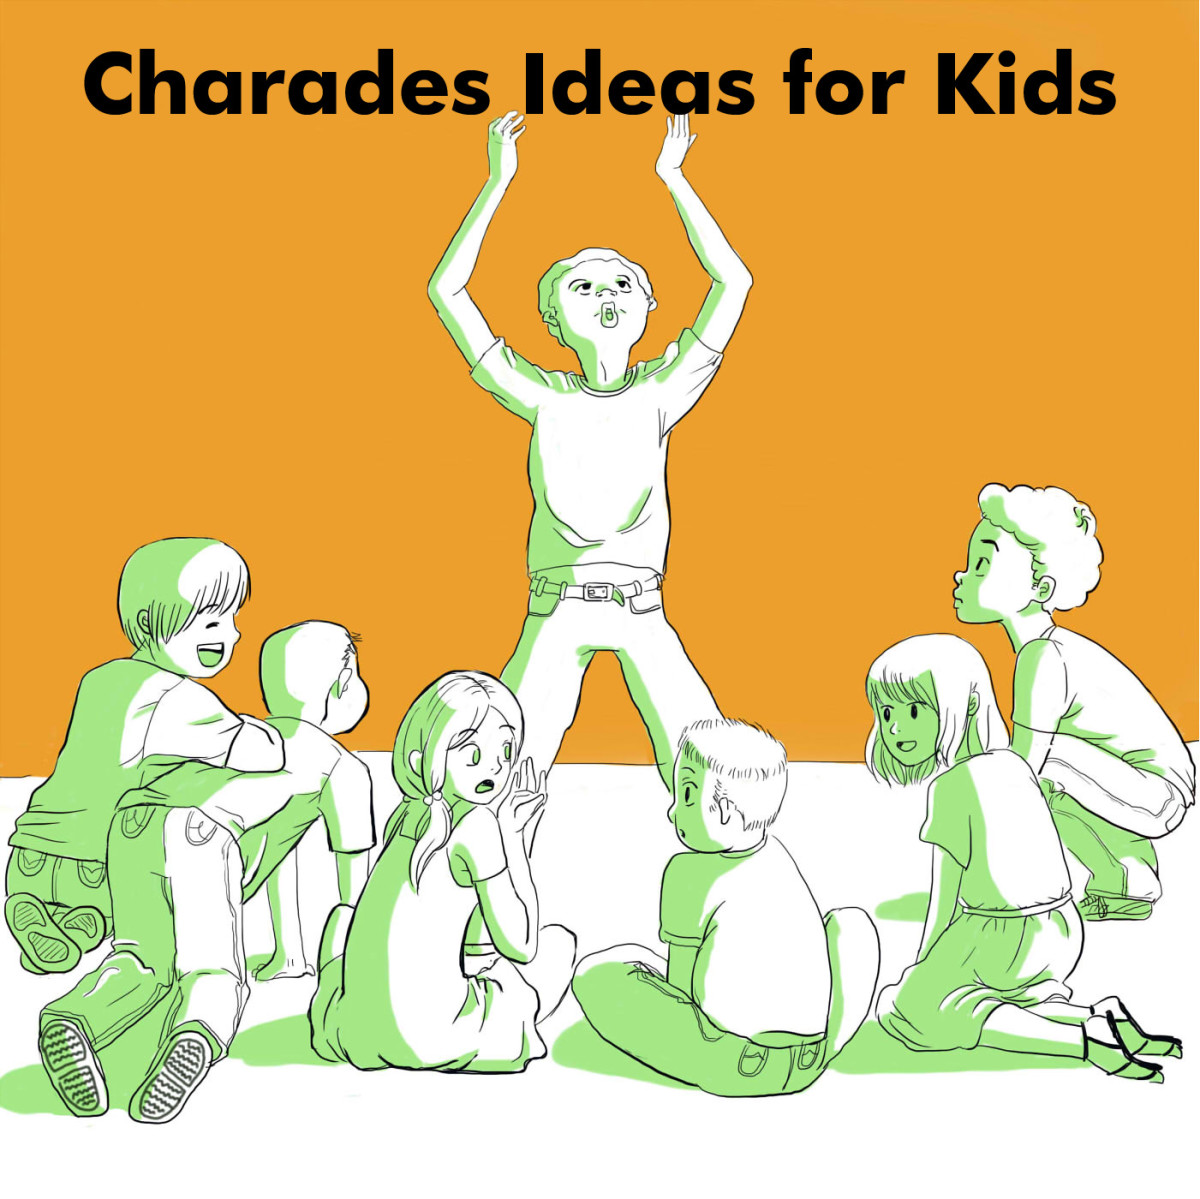 charades-ideas-for-kids